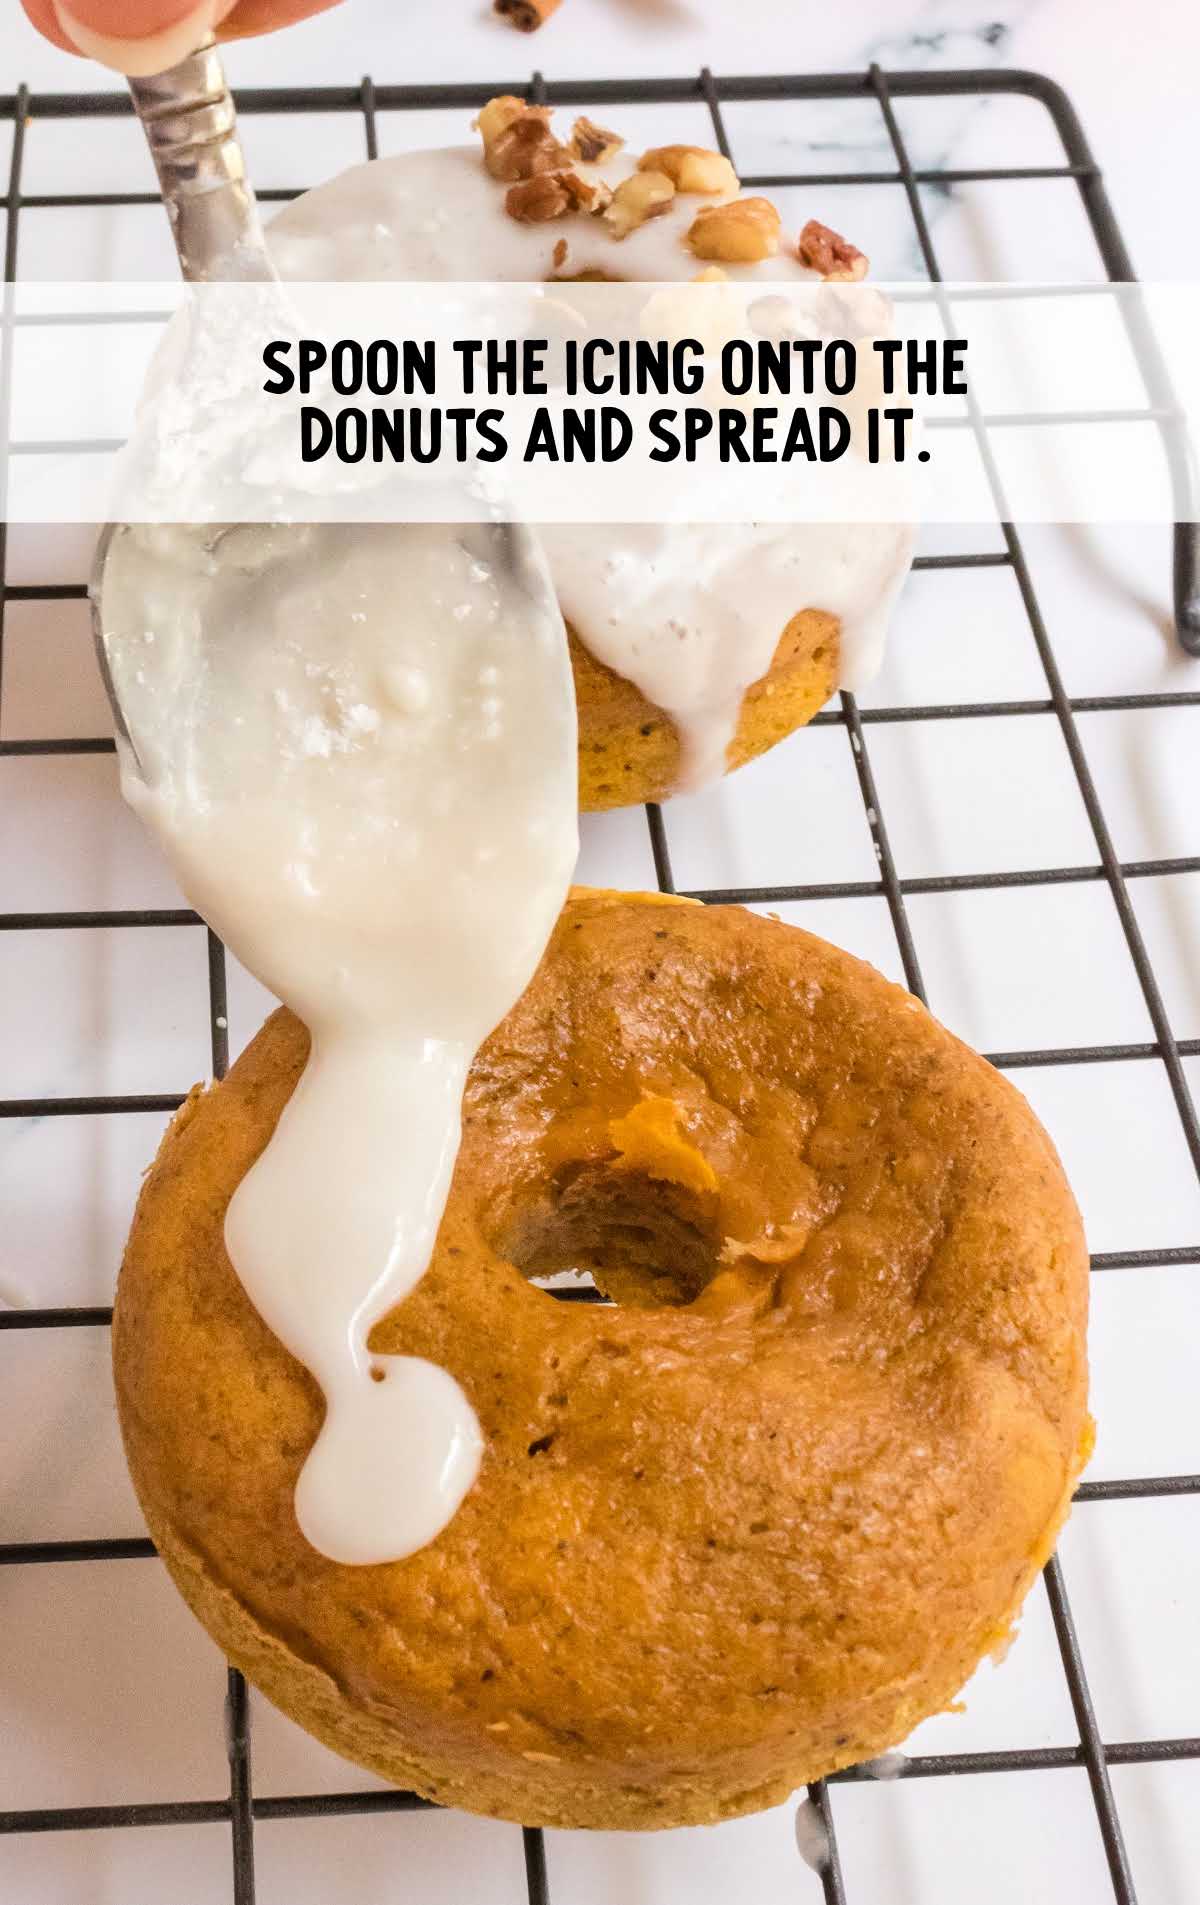 icing spooned onto the donut and spread it